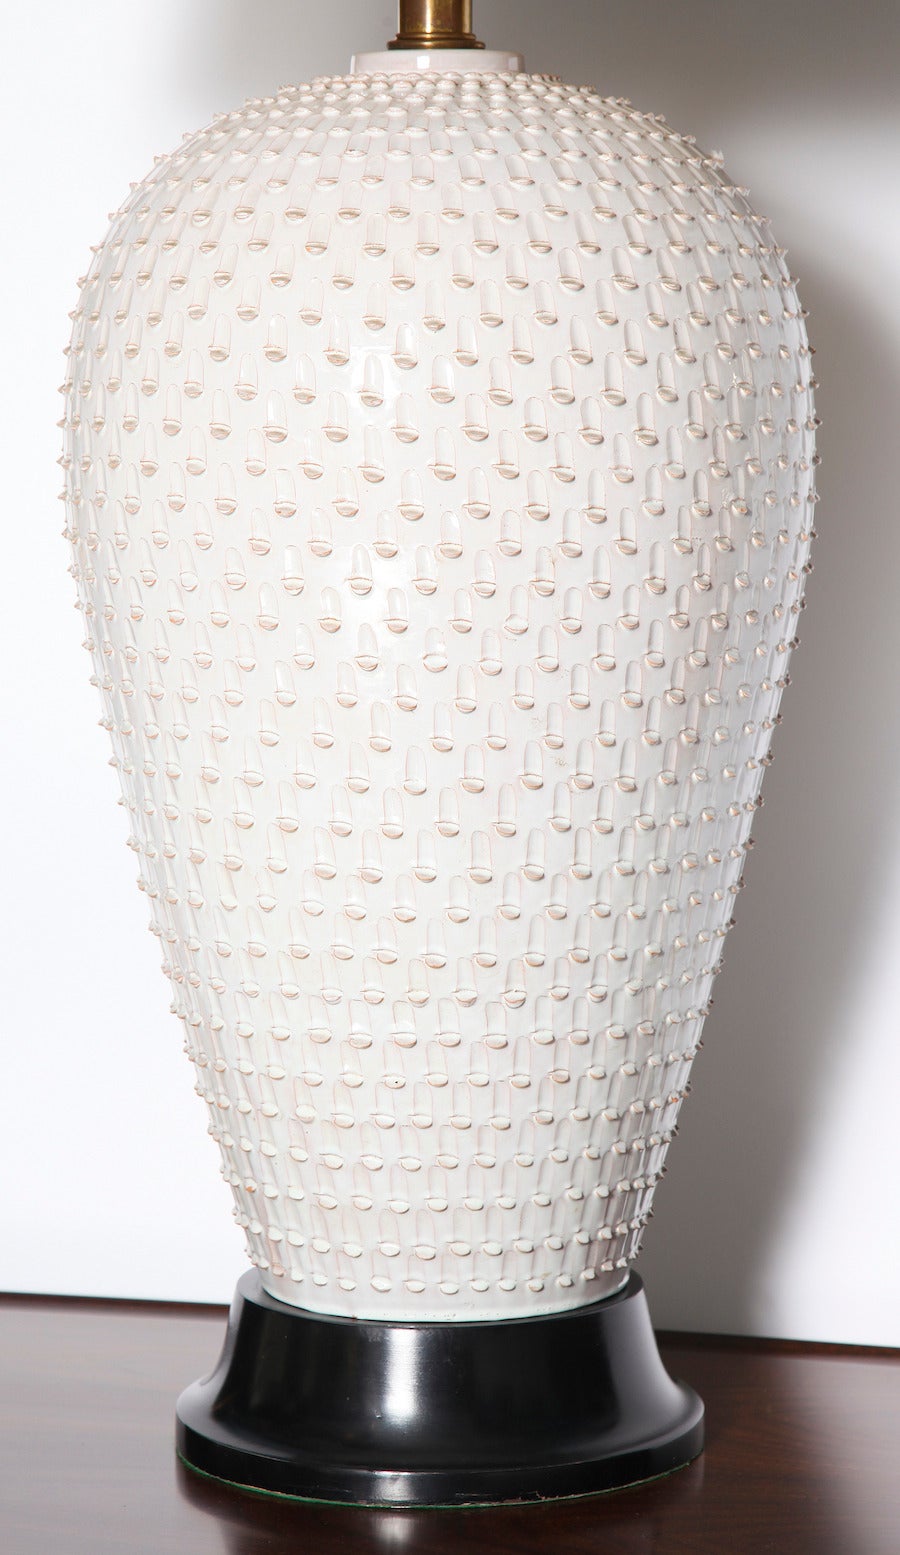  Monumental ceramic table lamp by Paul Laszlo. This custom-made lamp features a studio-made, large stoneware base with textured relief and white glaze. Ceramic made by Hegnetslund, Denmark, and is artist signed and dated, 1955. Custom mounts created